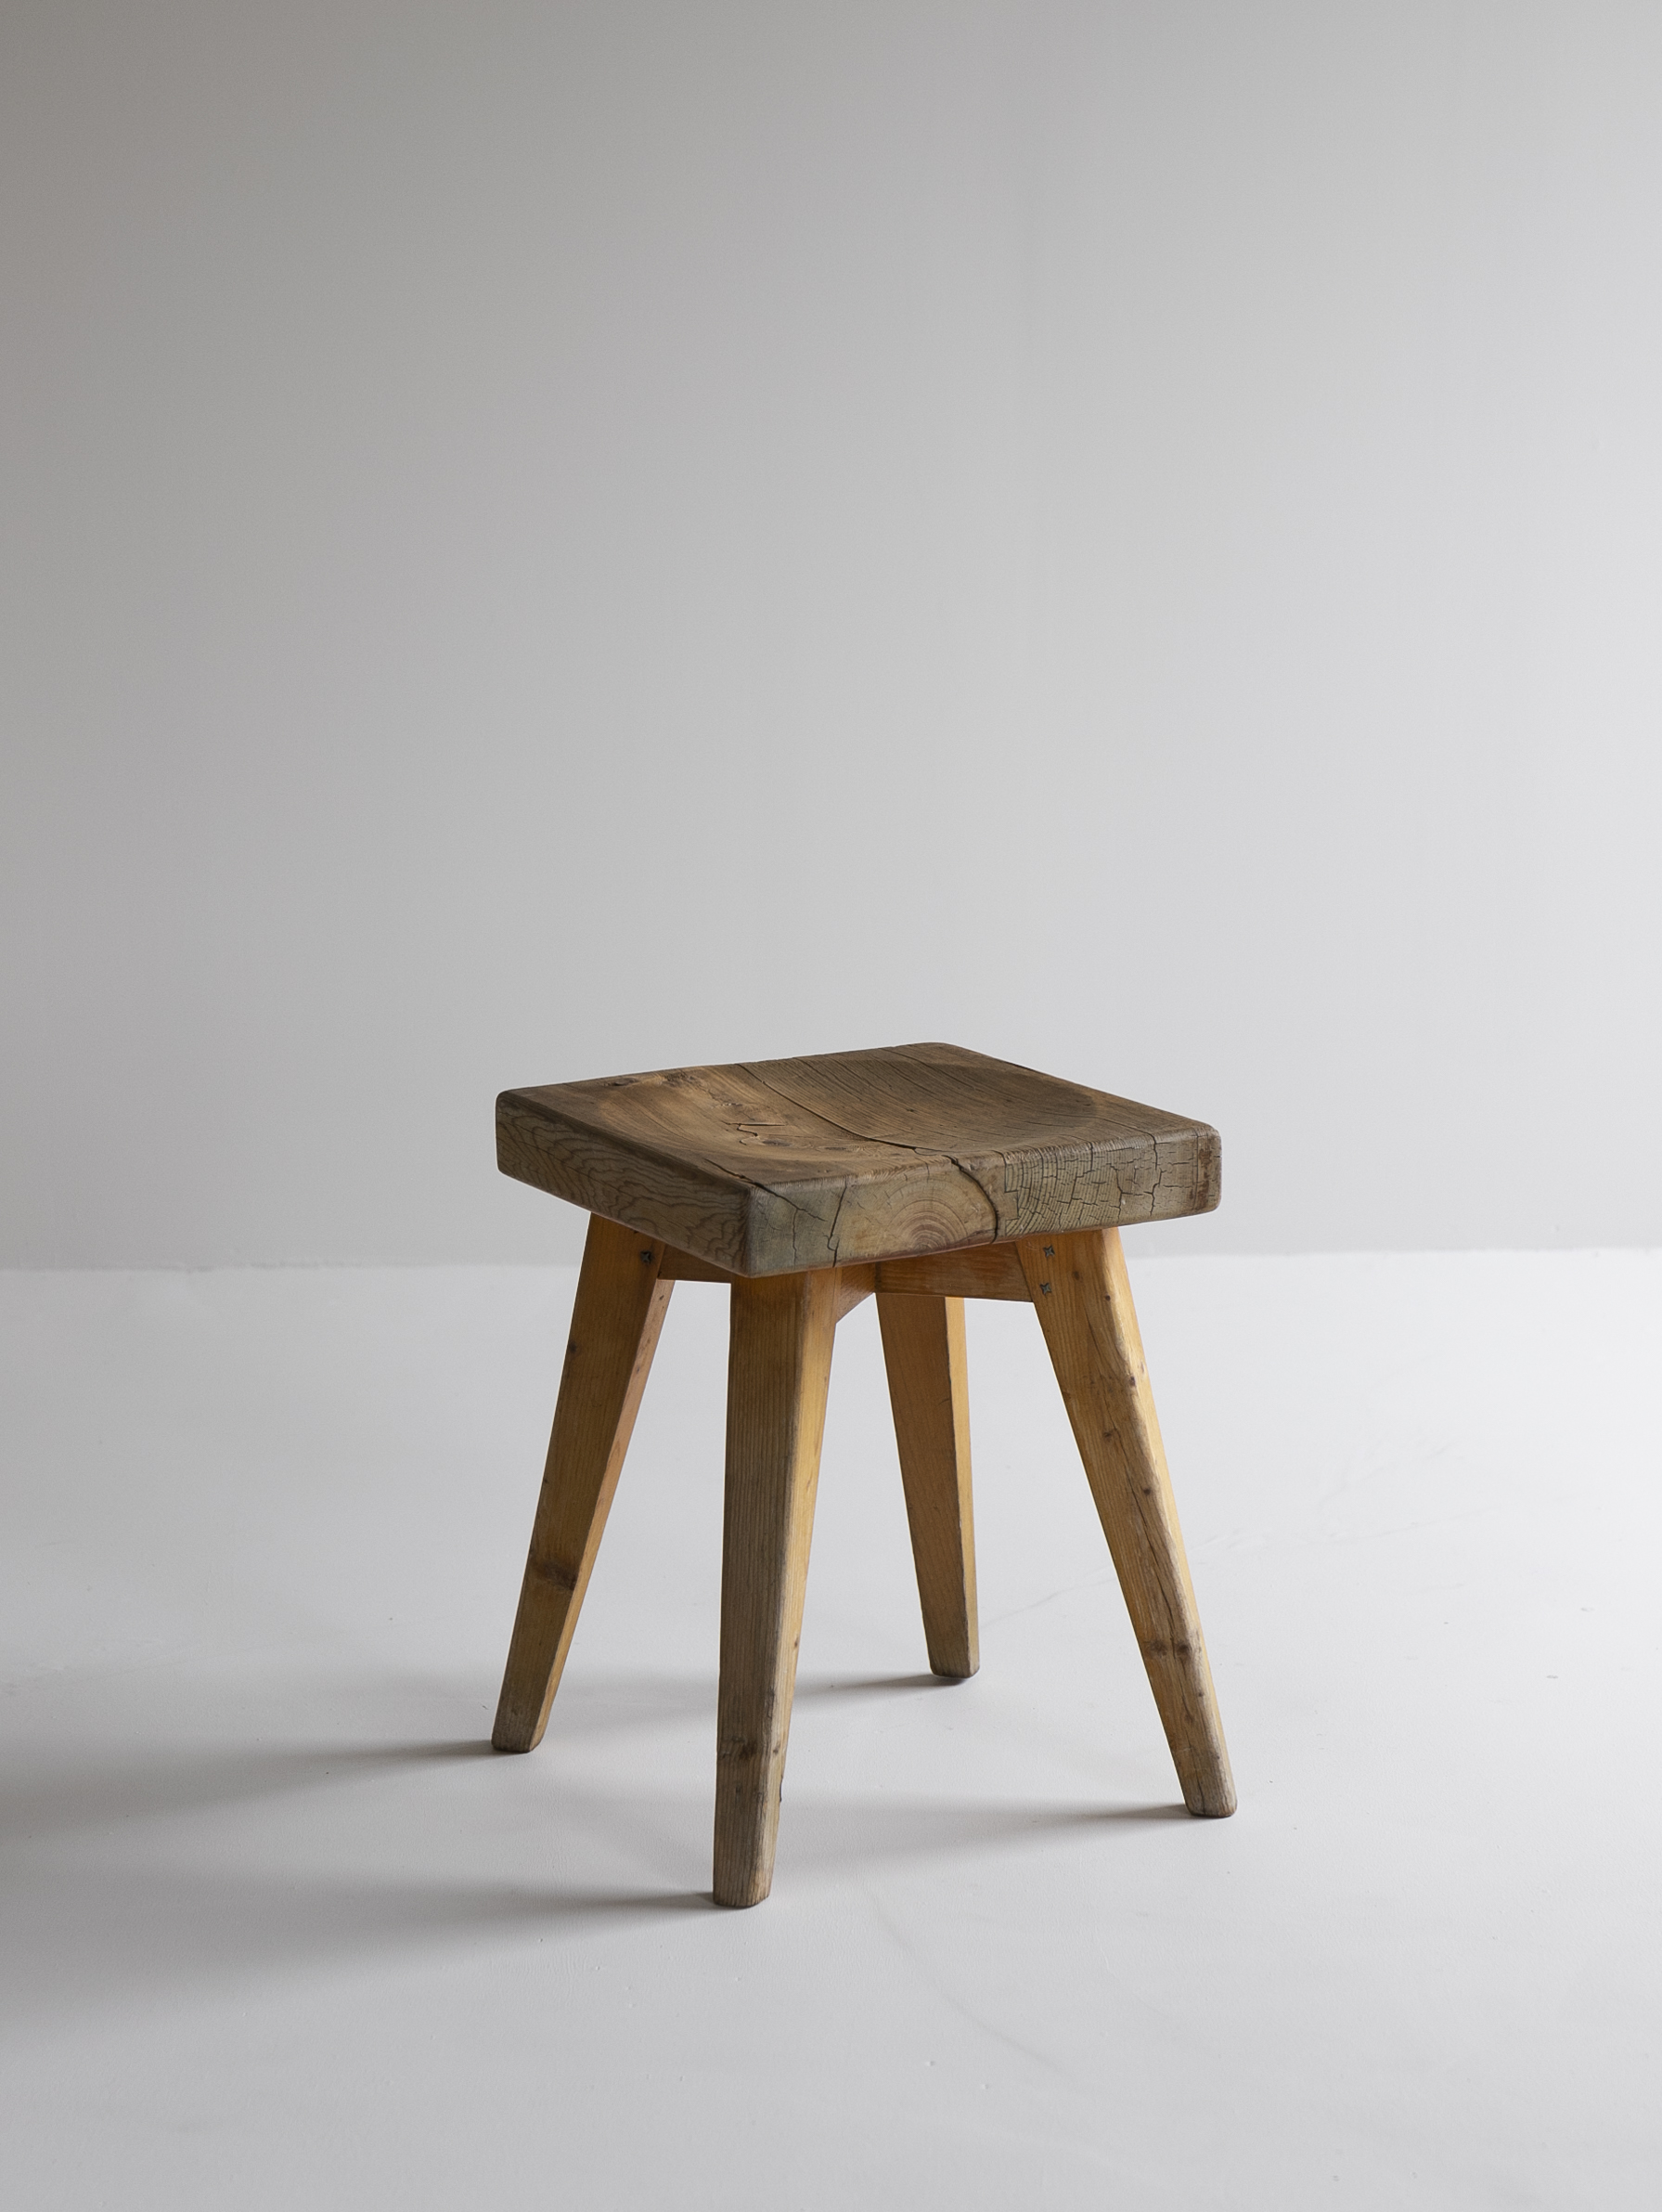 Vintage Stool by Charlotte Perriand and Christian Durupt